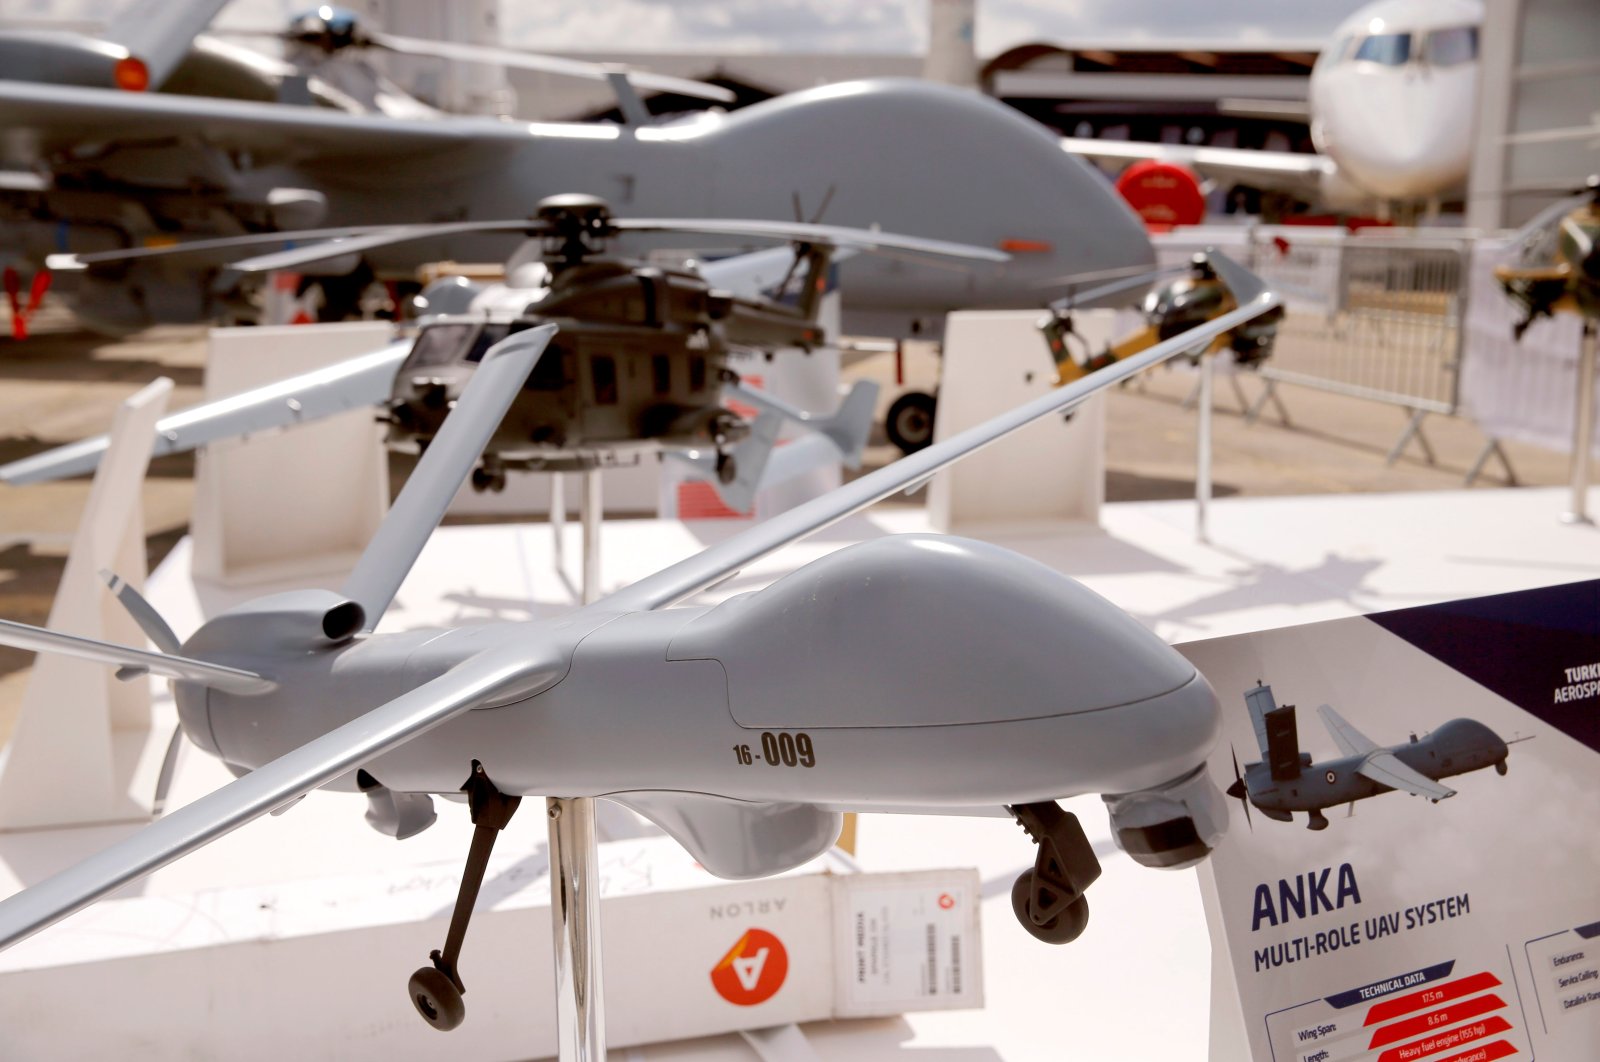 A model of Turkey's multi-role unmanned aerial vehicle ANKA on static display, on the eve of the opening of the 53rd International Paris Air Show at Le Bourget Airport near Paris, France, June 16, 2019. (Reuters Photo)